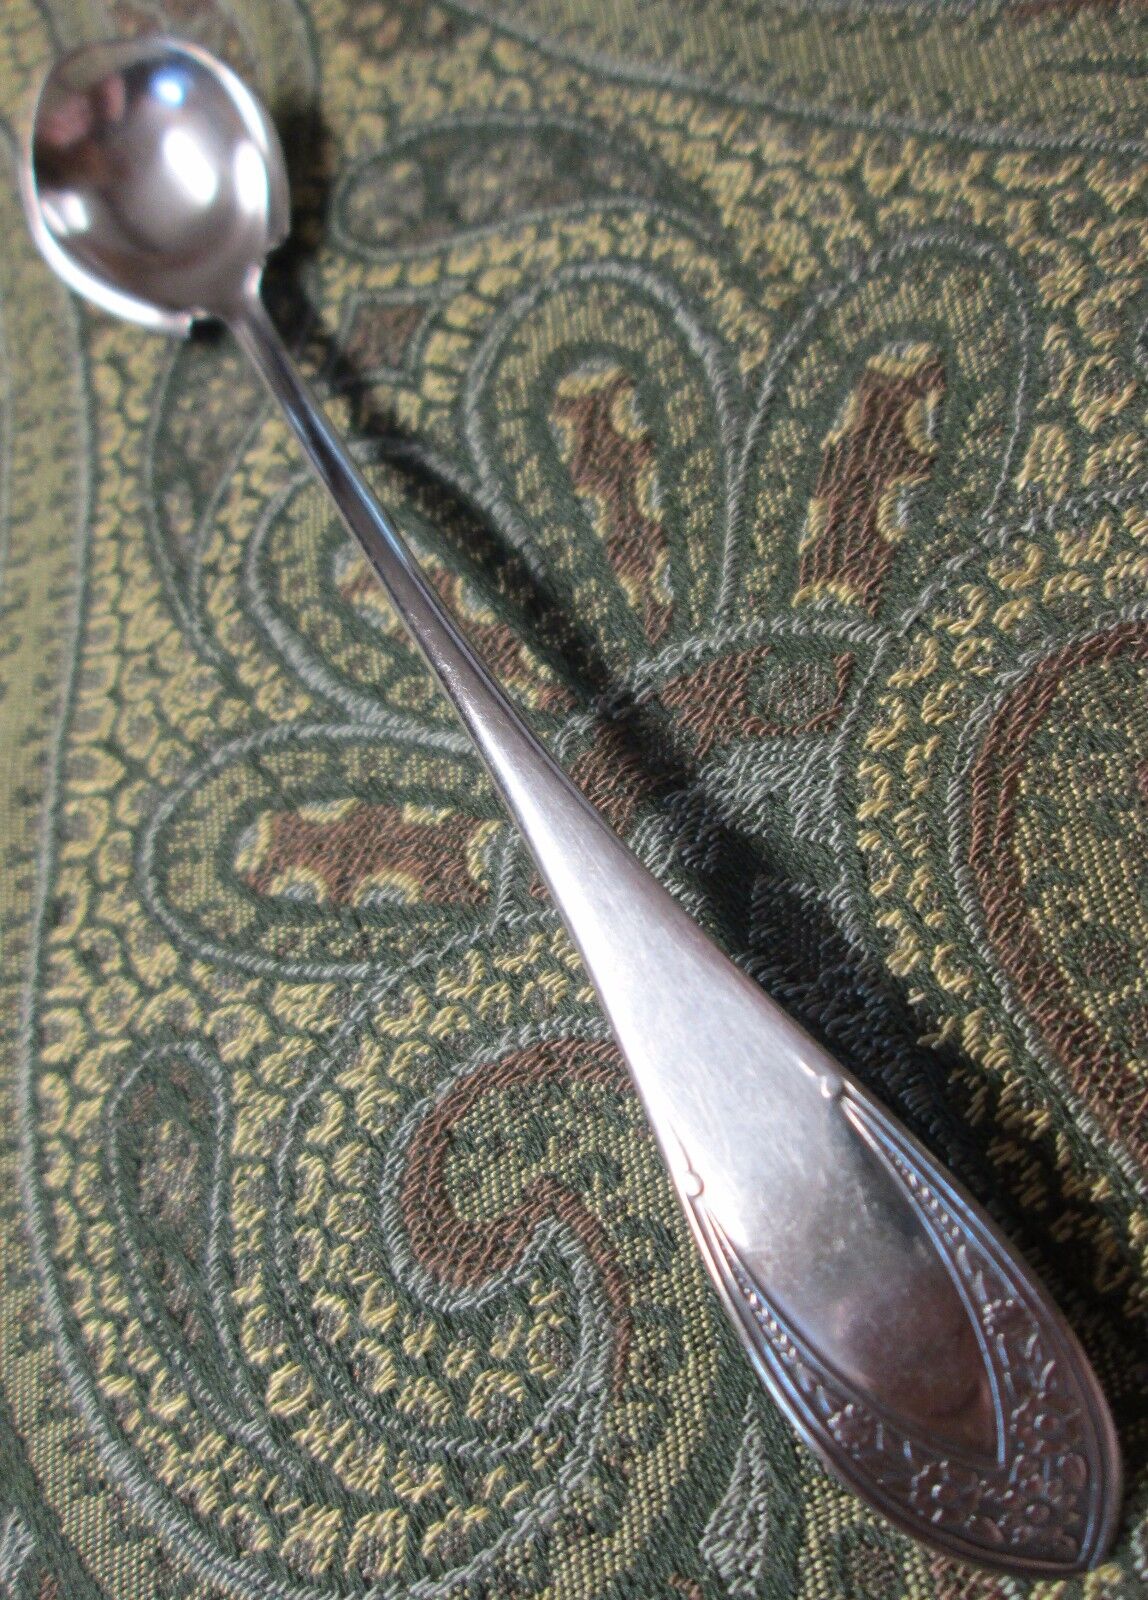 IMPERIAL 1877 Silverplate Mustard or Condiment Ladle Ornate Silverplate 